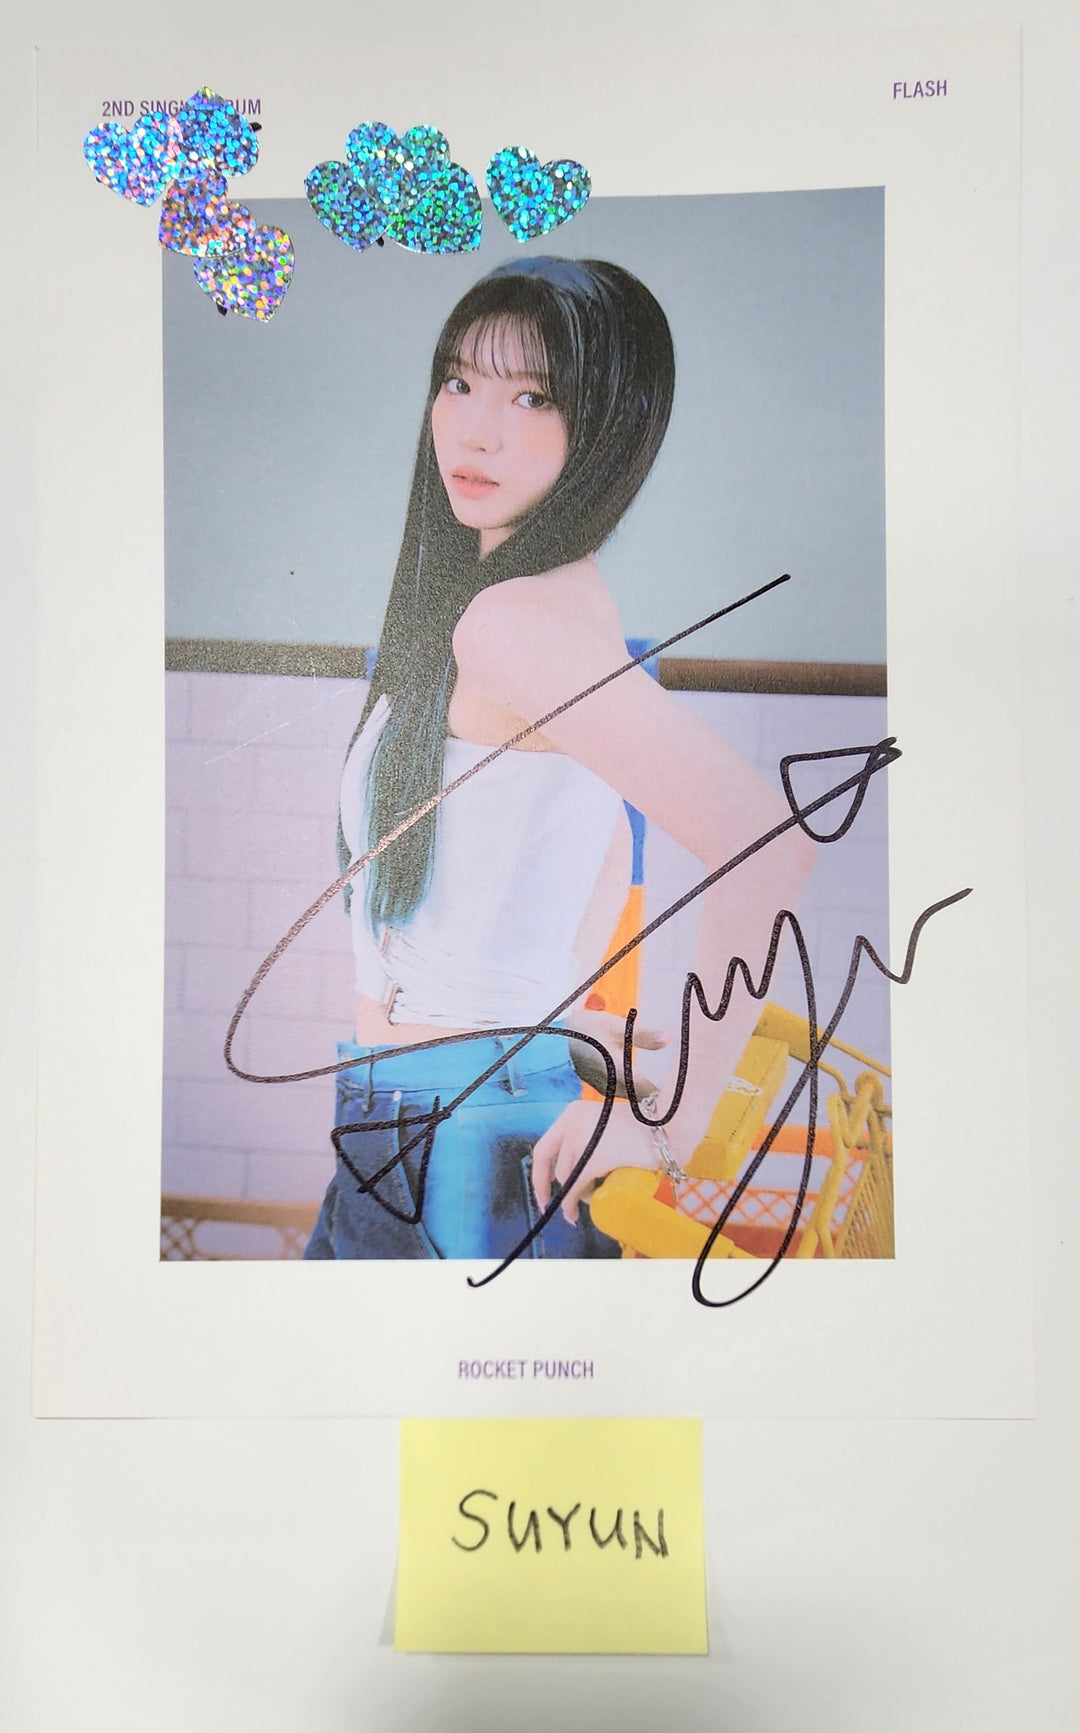 SUYUN (Of Rocket Punch) "FLASH" - A Cut Page From Fansign Event Album